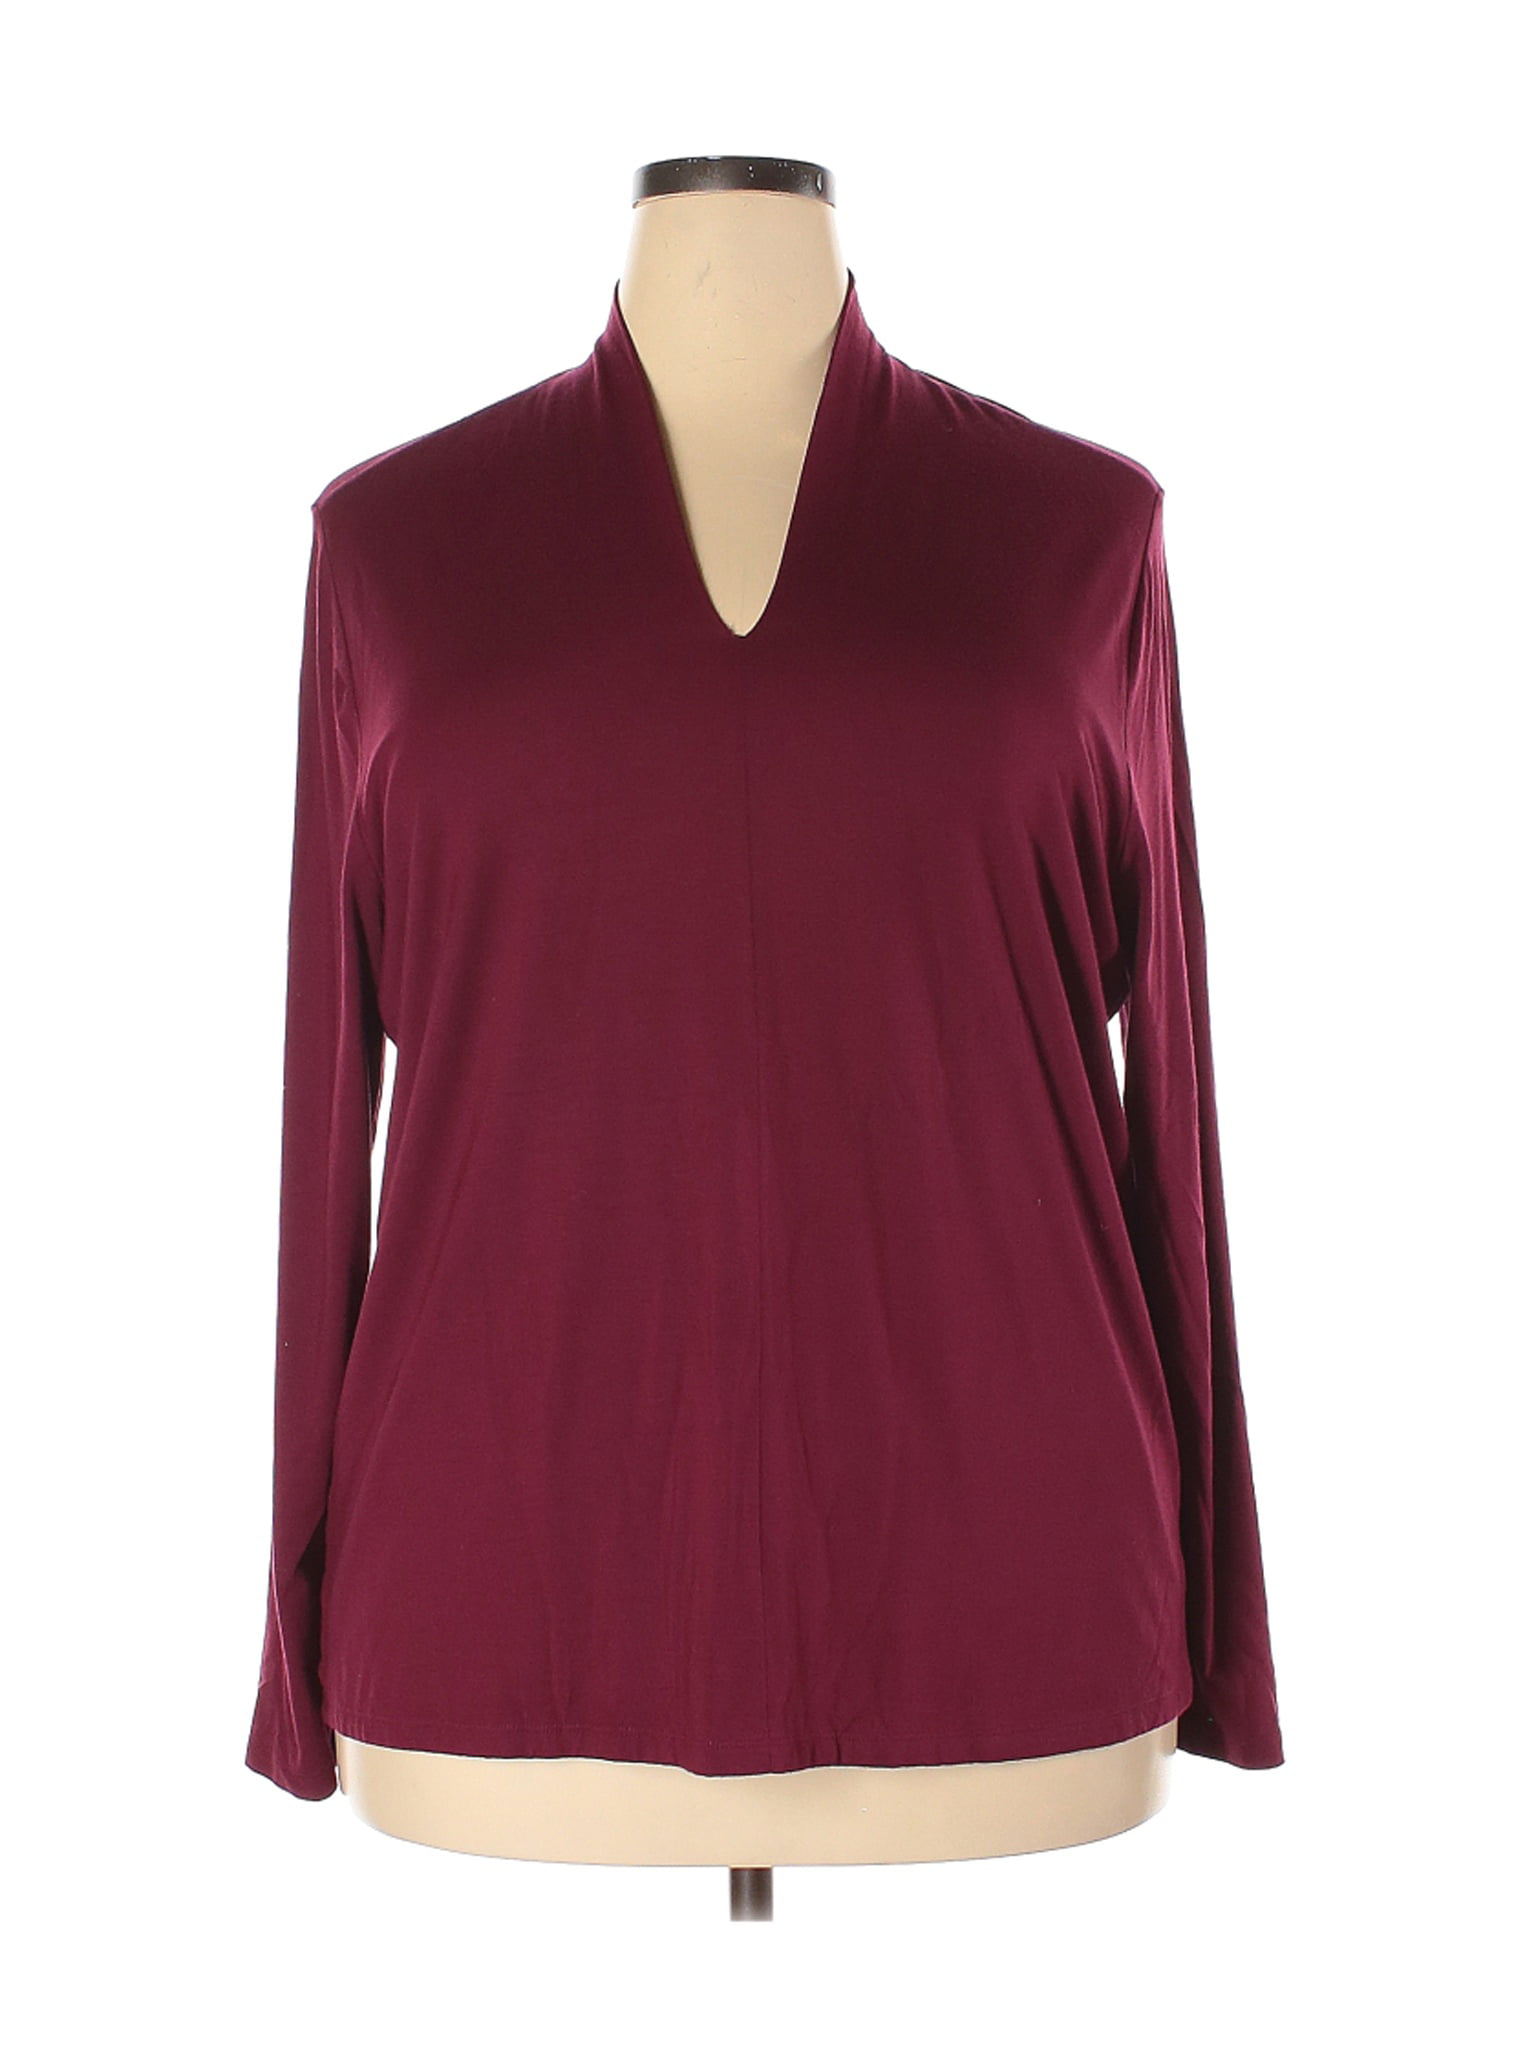 Talbots - Pre-Owned Talbots Women's Size 2X Plus Long Sleeve Top ...